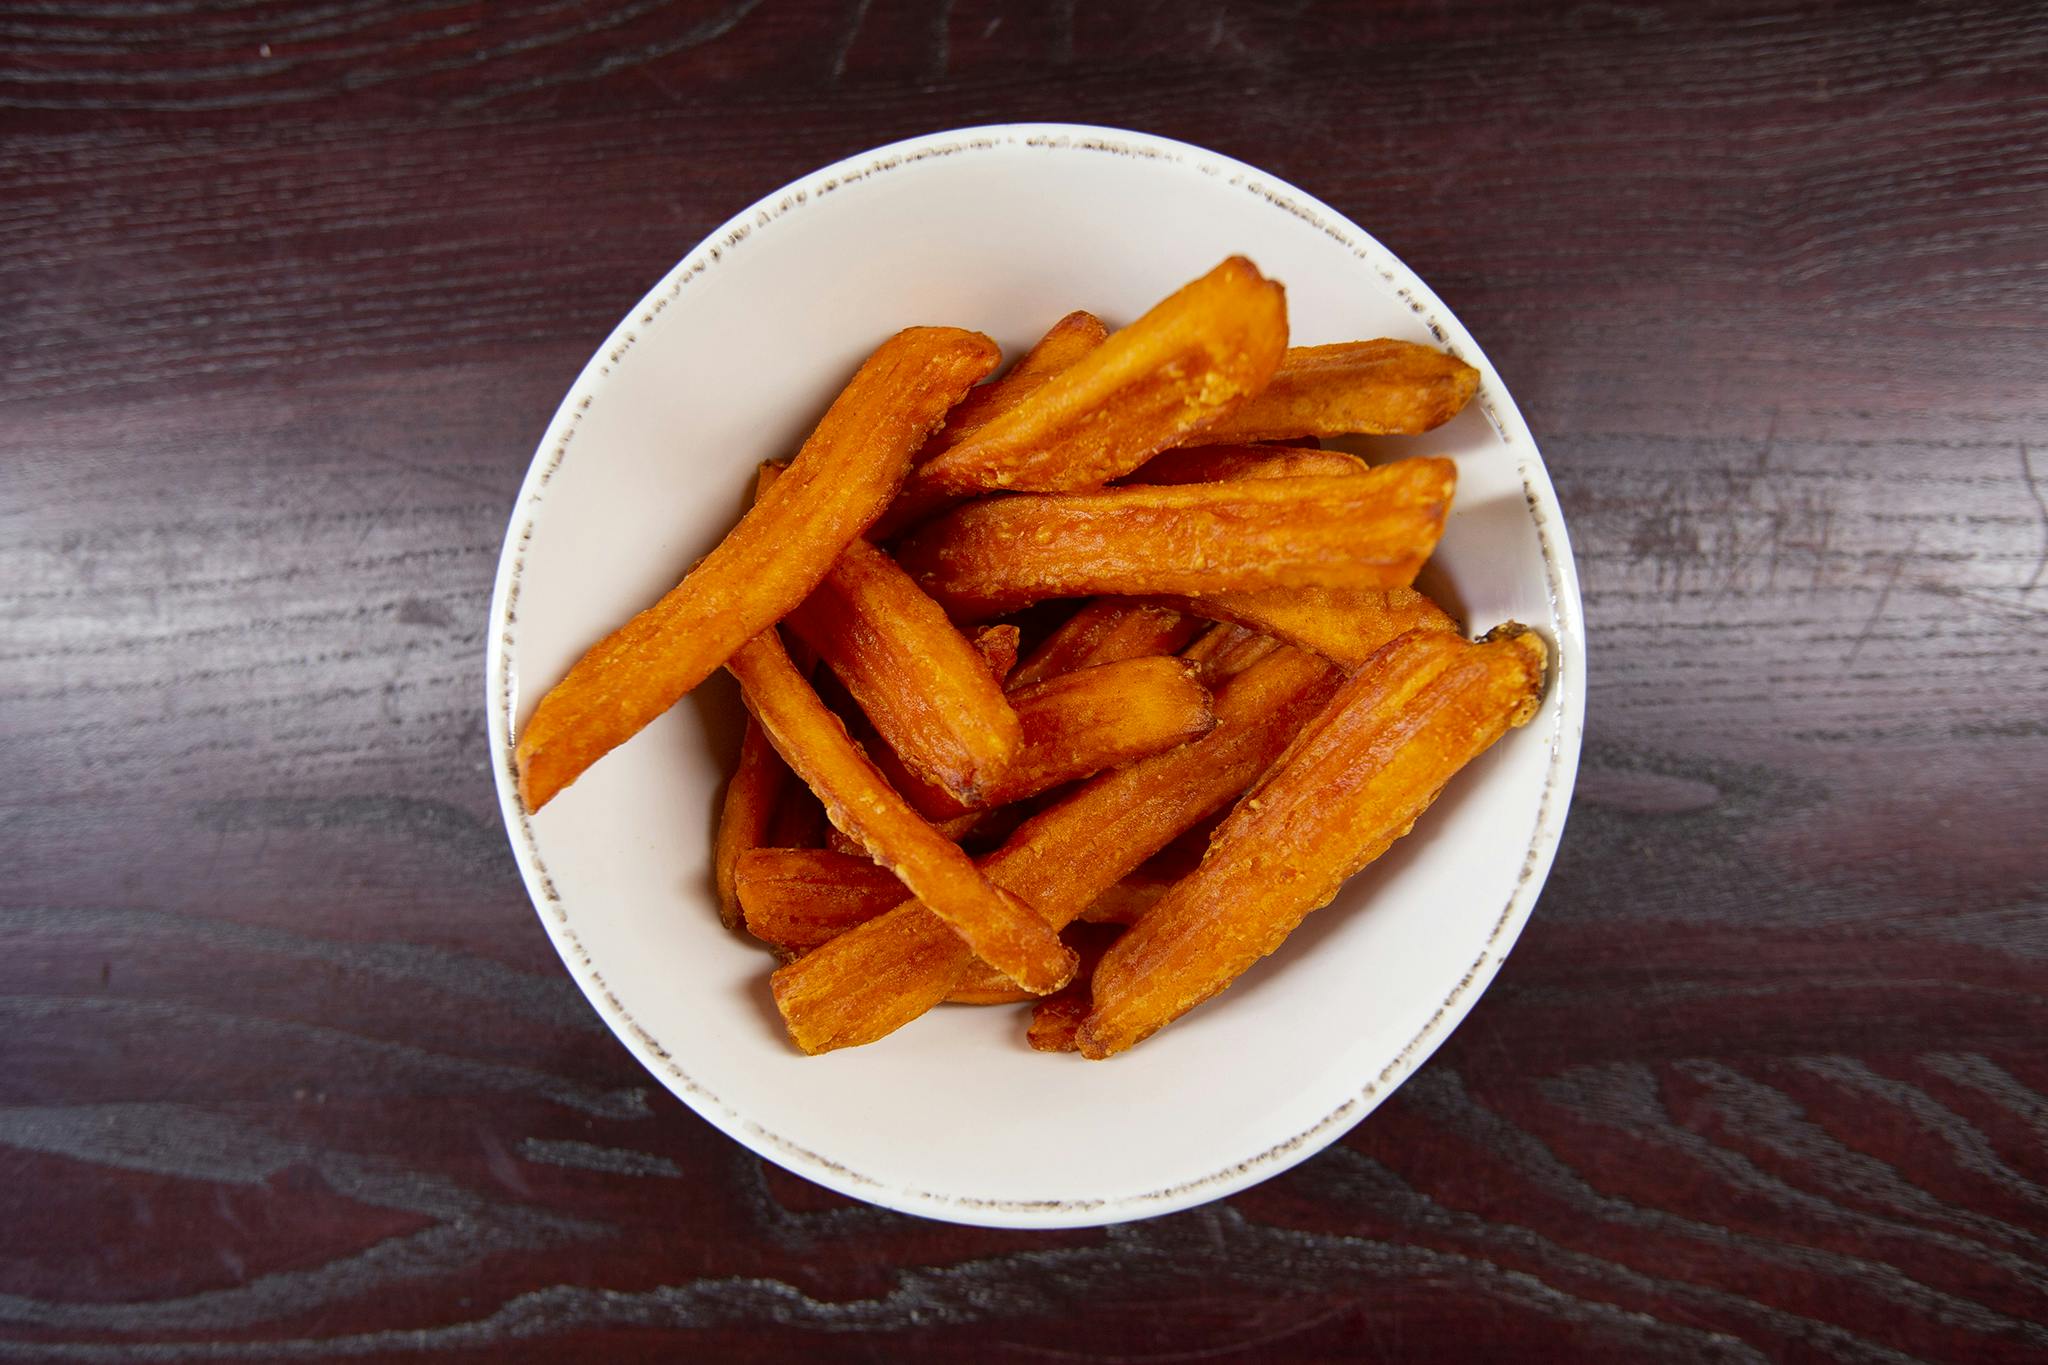 Sweet Potato Fries from Firehouse Grill - Chicago Ave in Evanston, IL